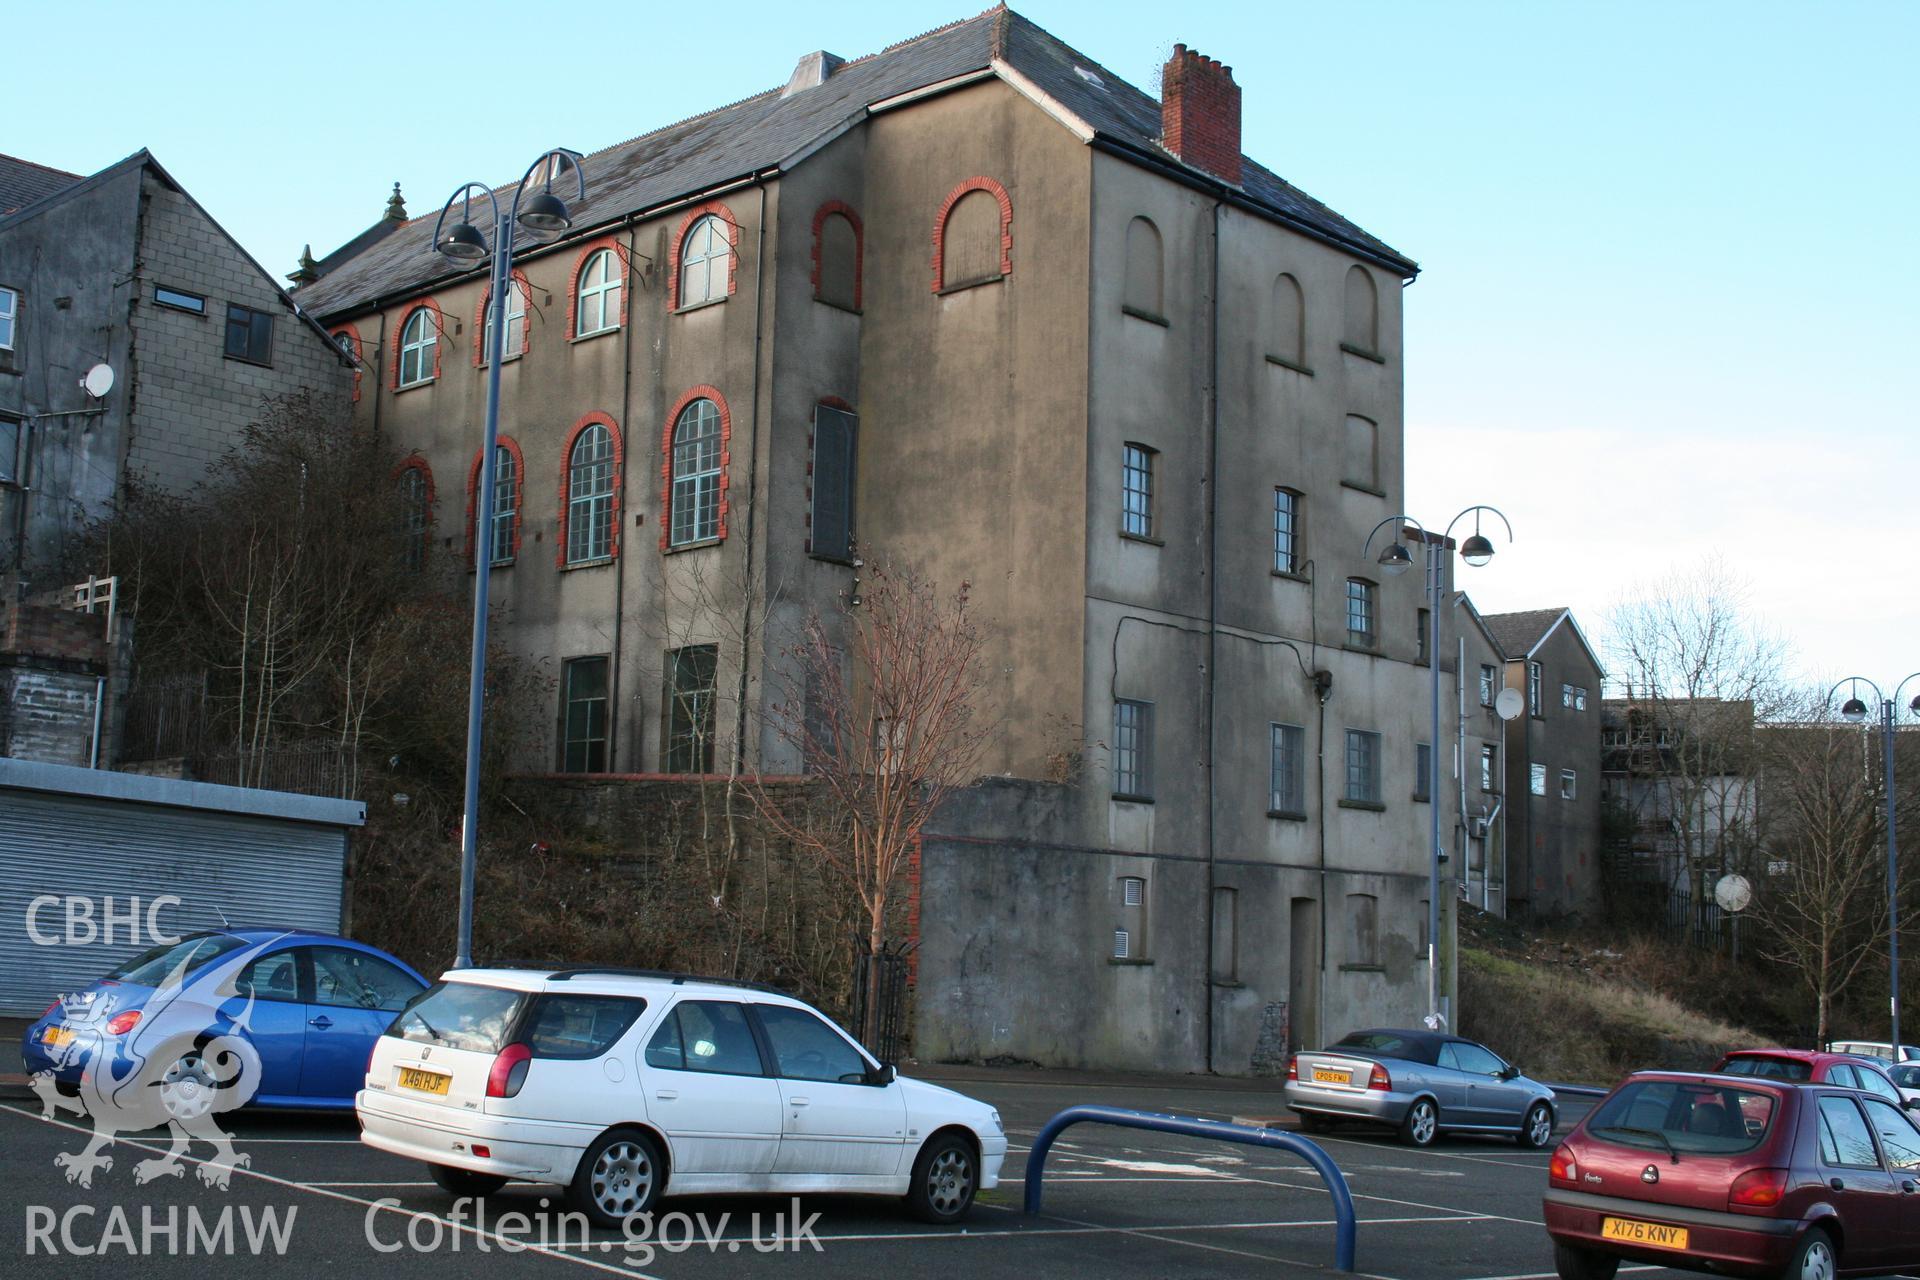 Hanbury Road baptist chapel, Bargoed, digital colour photograph showing exterior - rear, received in the course of Emergency Recording case ref no RCS2/1/2247.